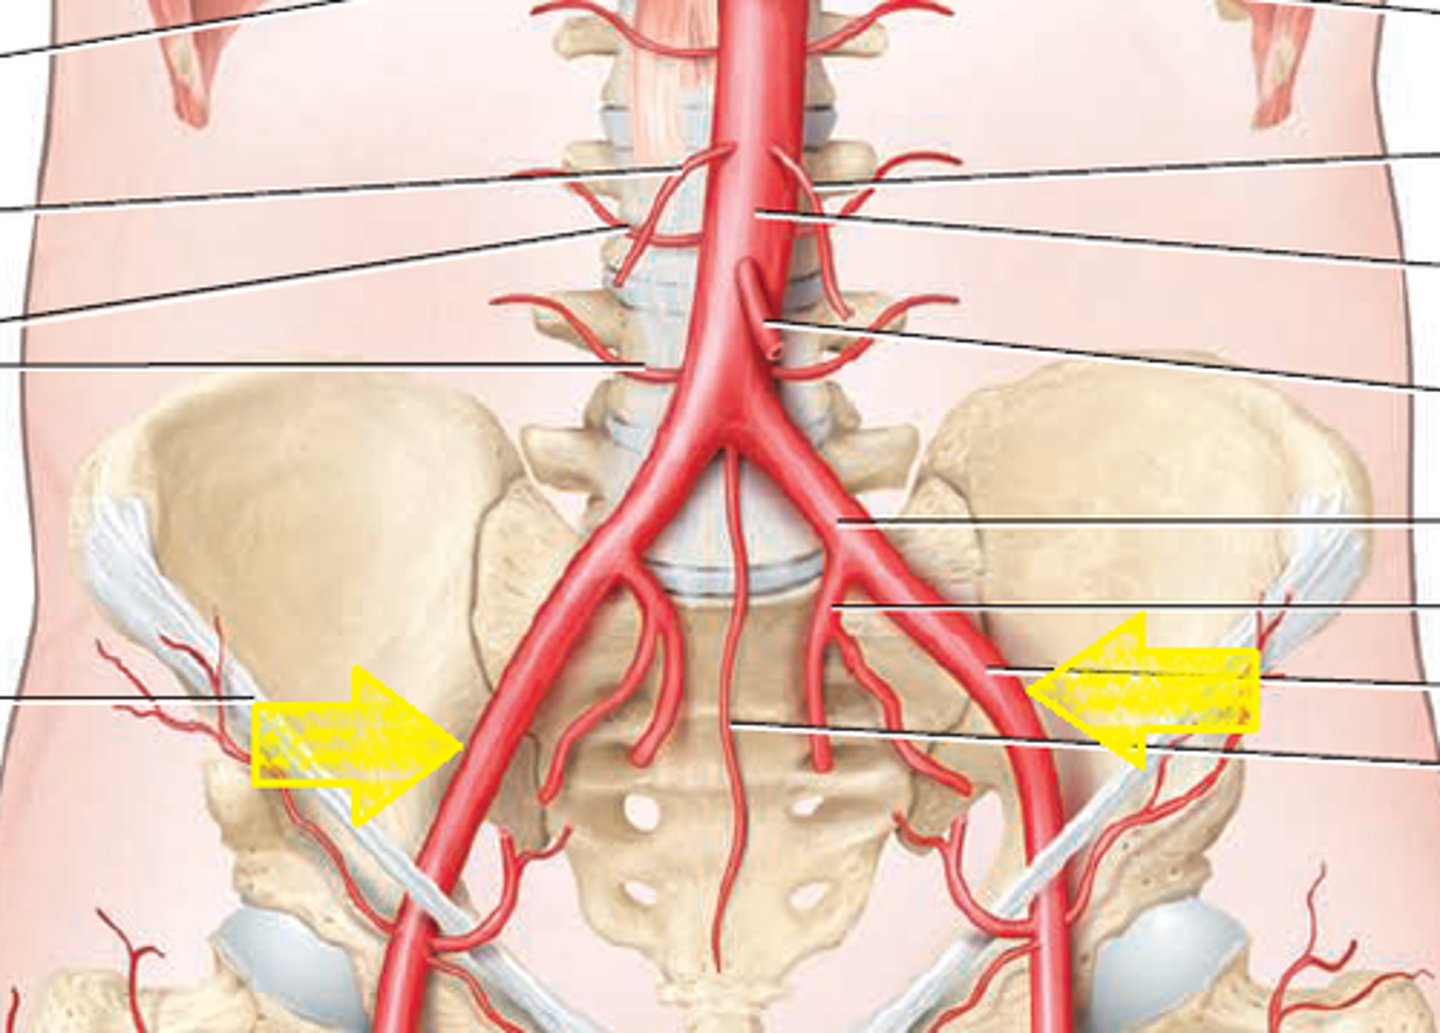 <p>supply the anterior abdominal wall, pelvic organs, and lower limbs</p>